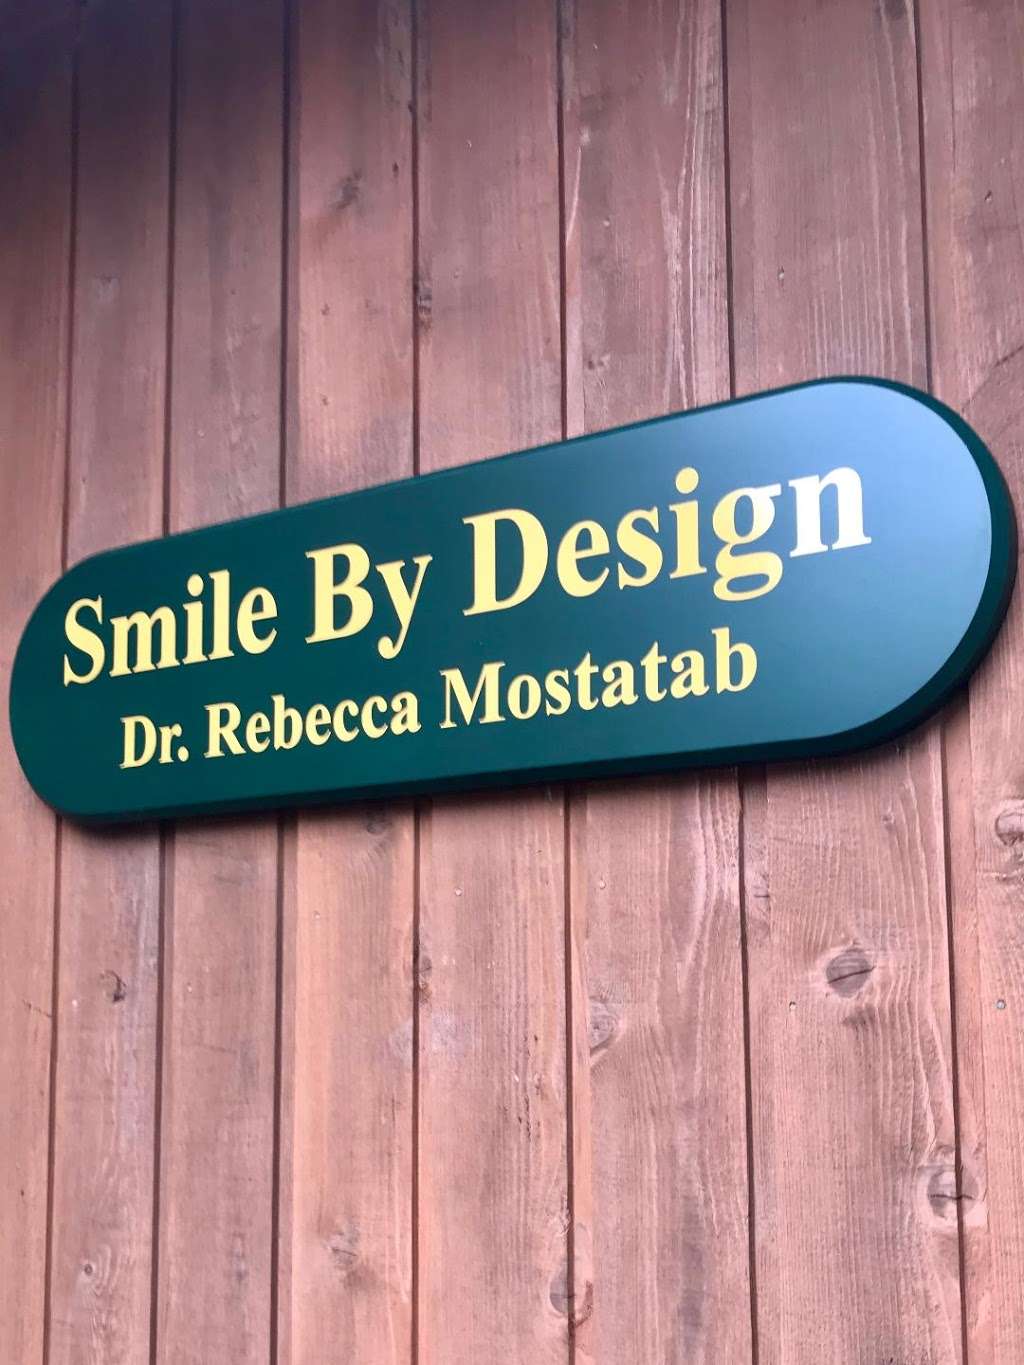 Smile By Design | 1288 Valley Forge Rd Unit 52, Phoenixville, PA 19460 | Phone: (484) 920-3687